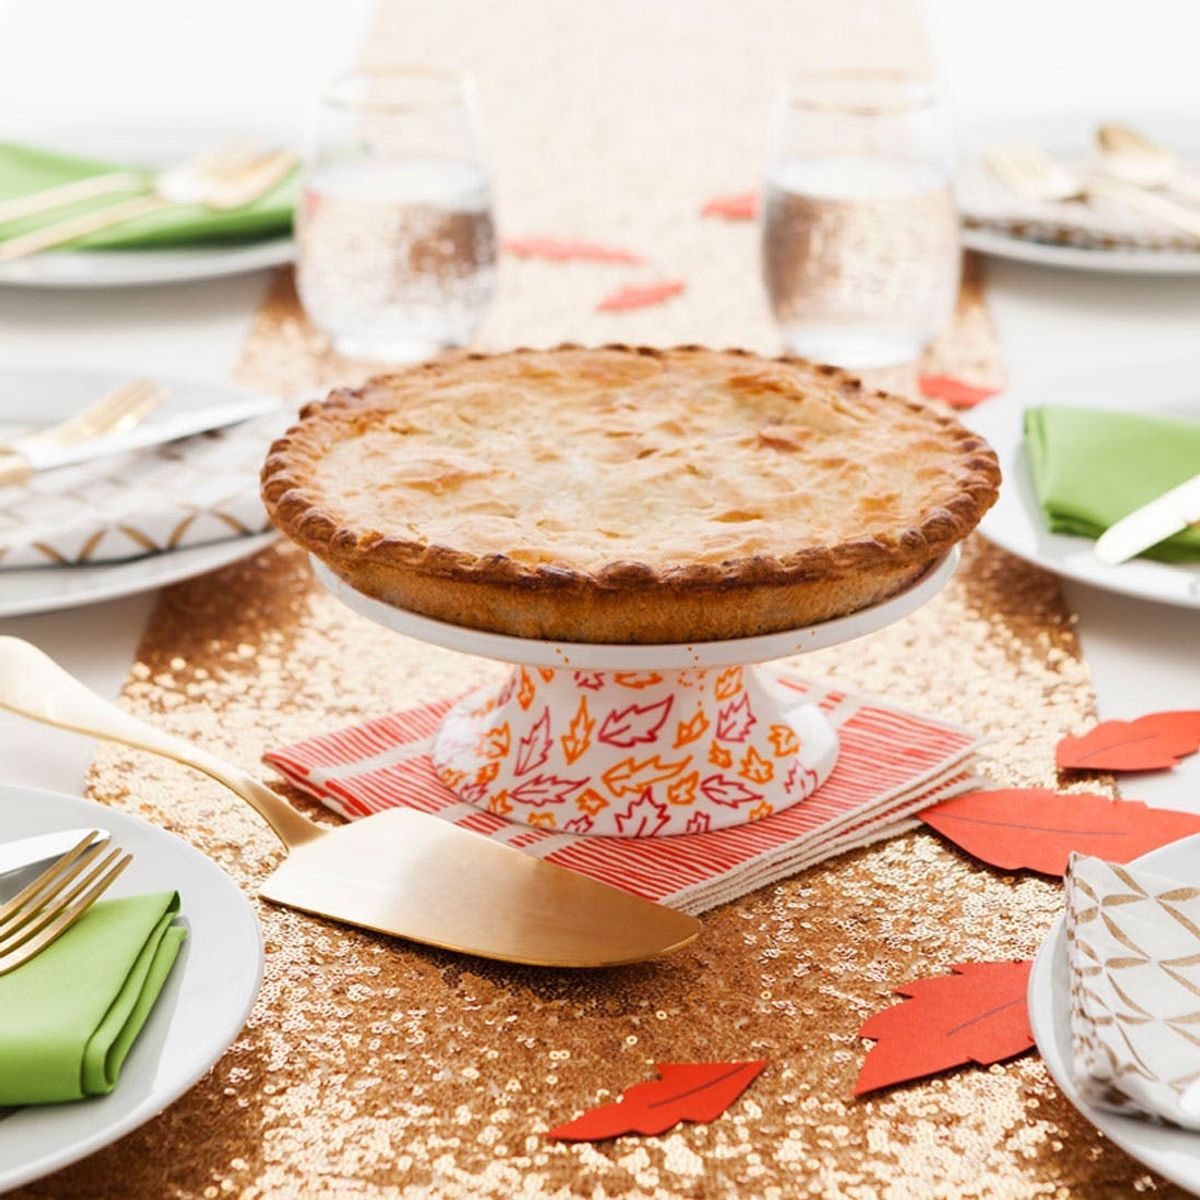 The Best Way to Serve a Pie at Your Friendsgiving Dinner